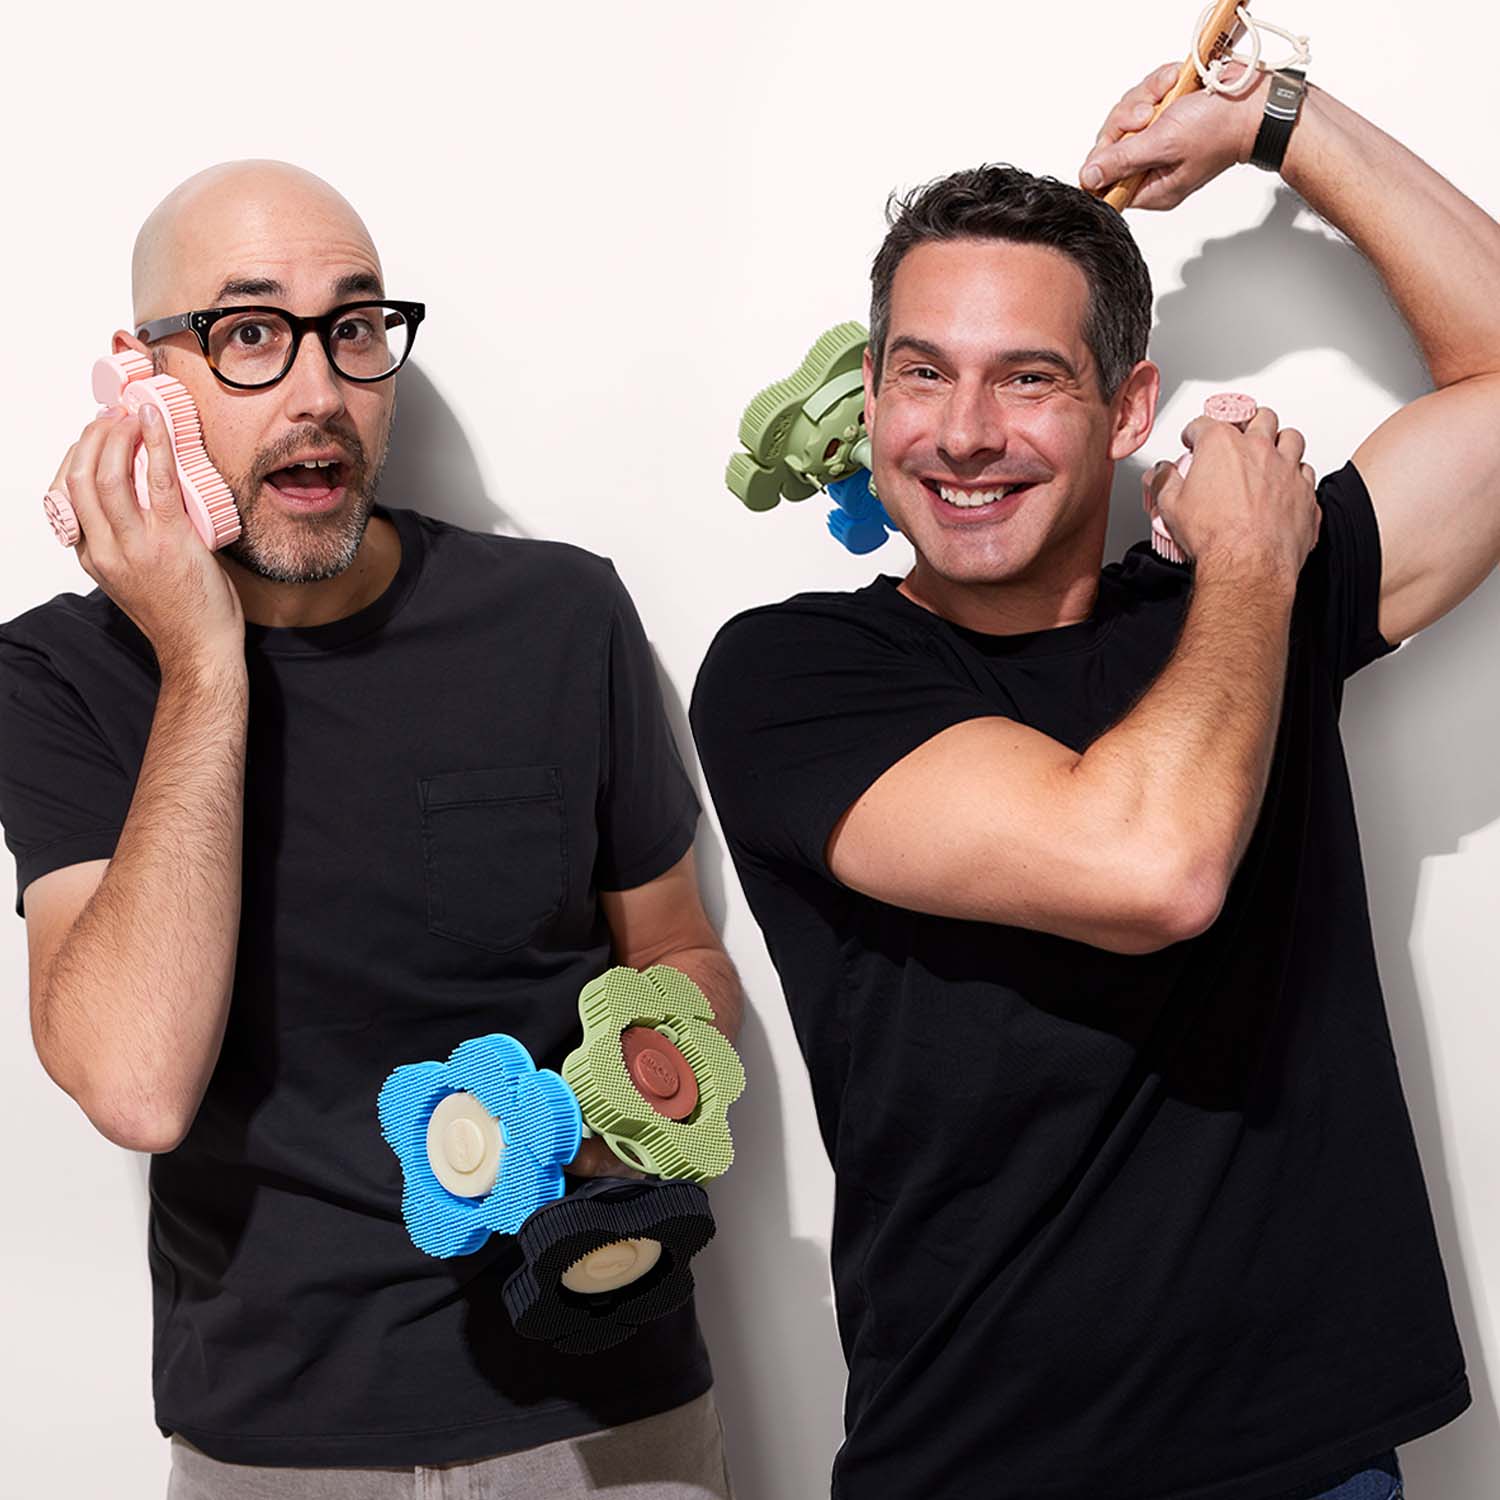 Founders Adam and Adam in black shirts, holding smoosh scrubbers in hand posing, happy